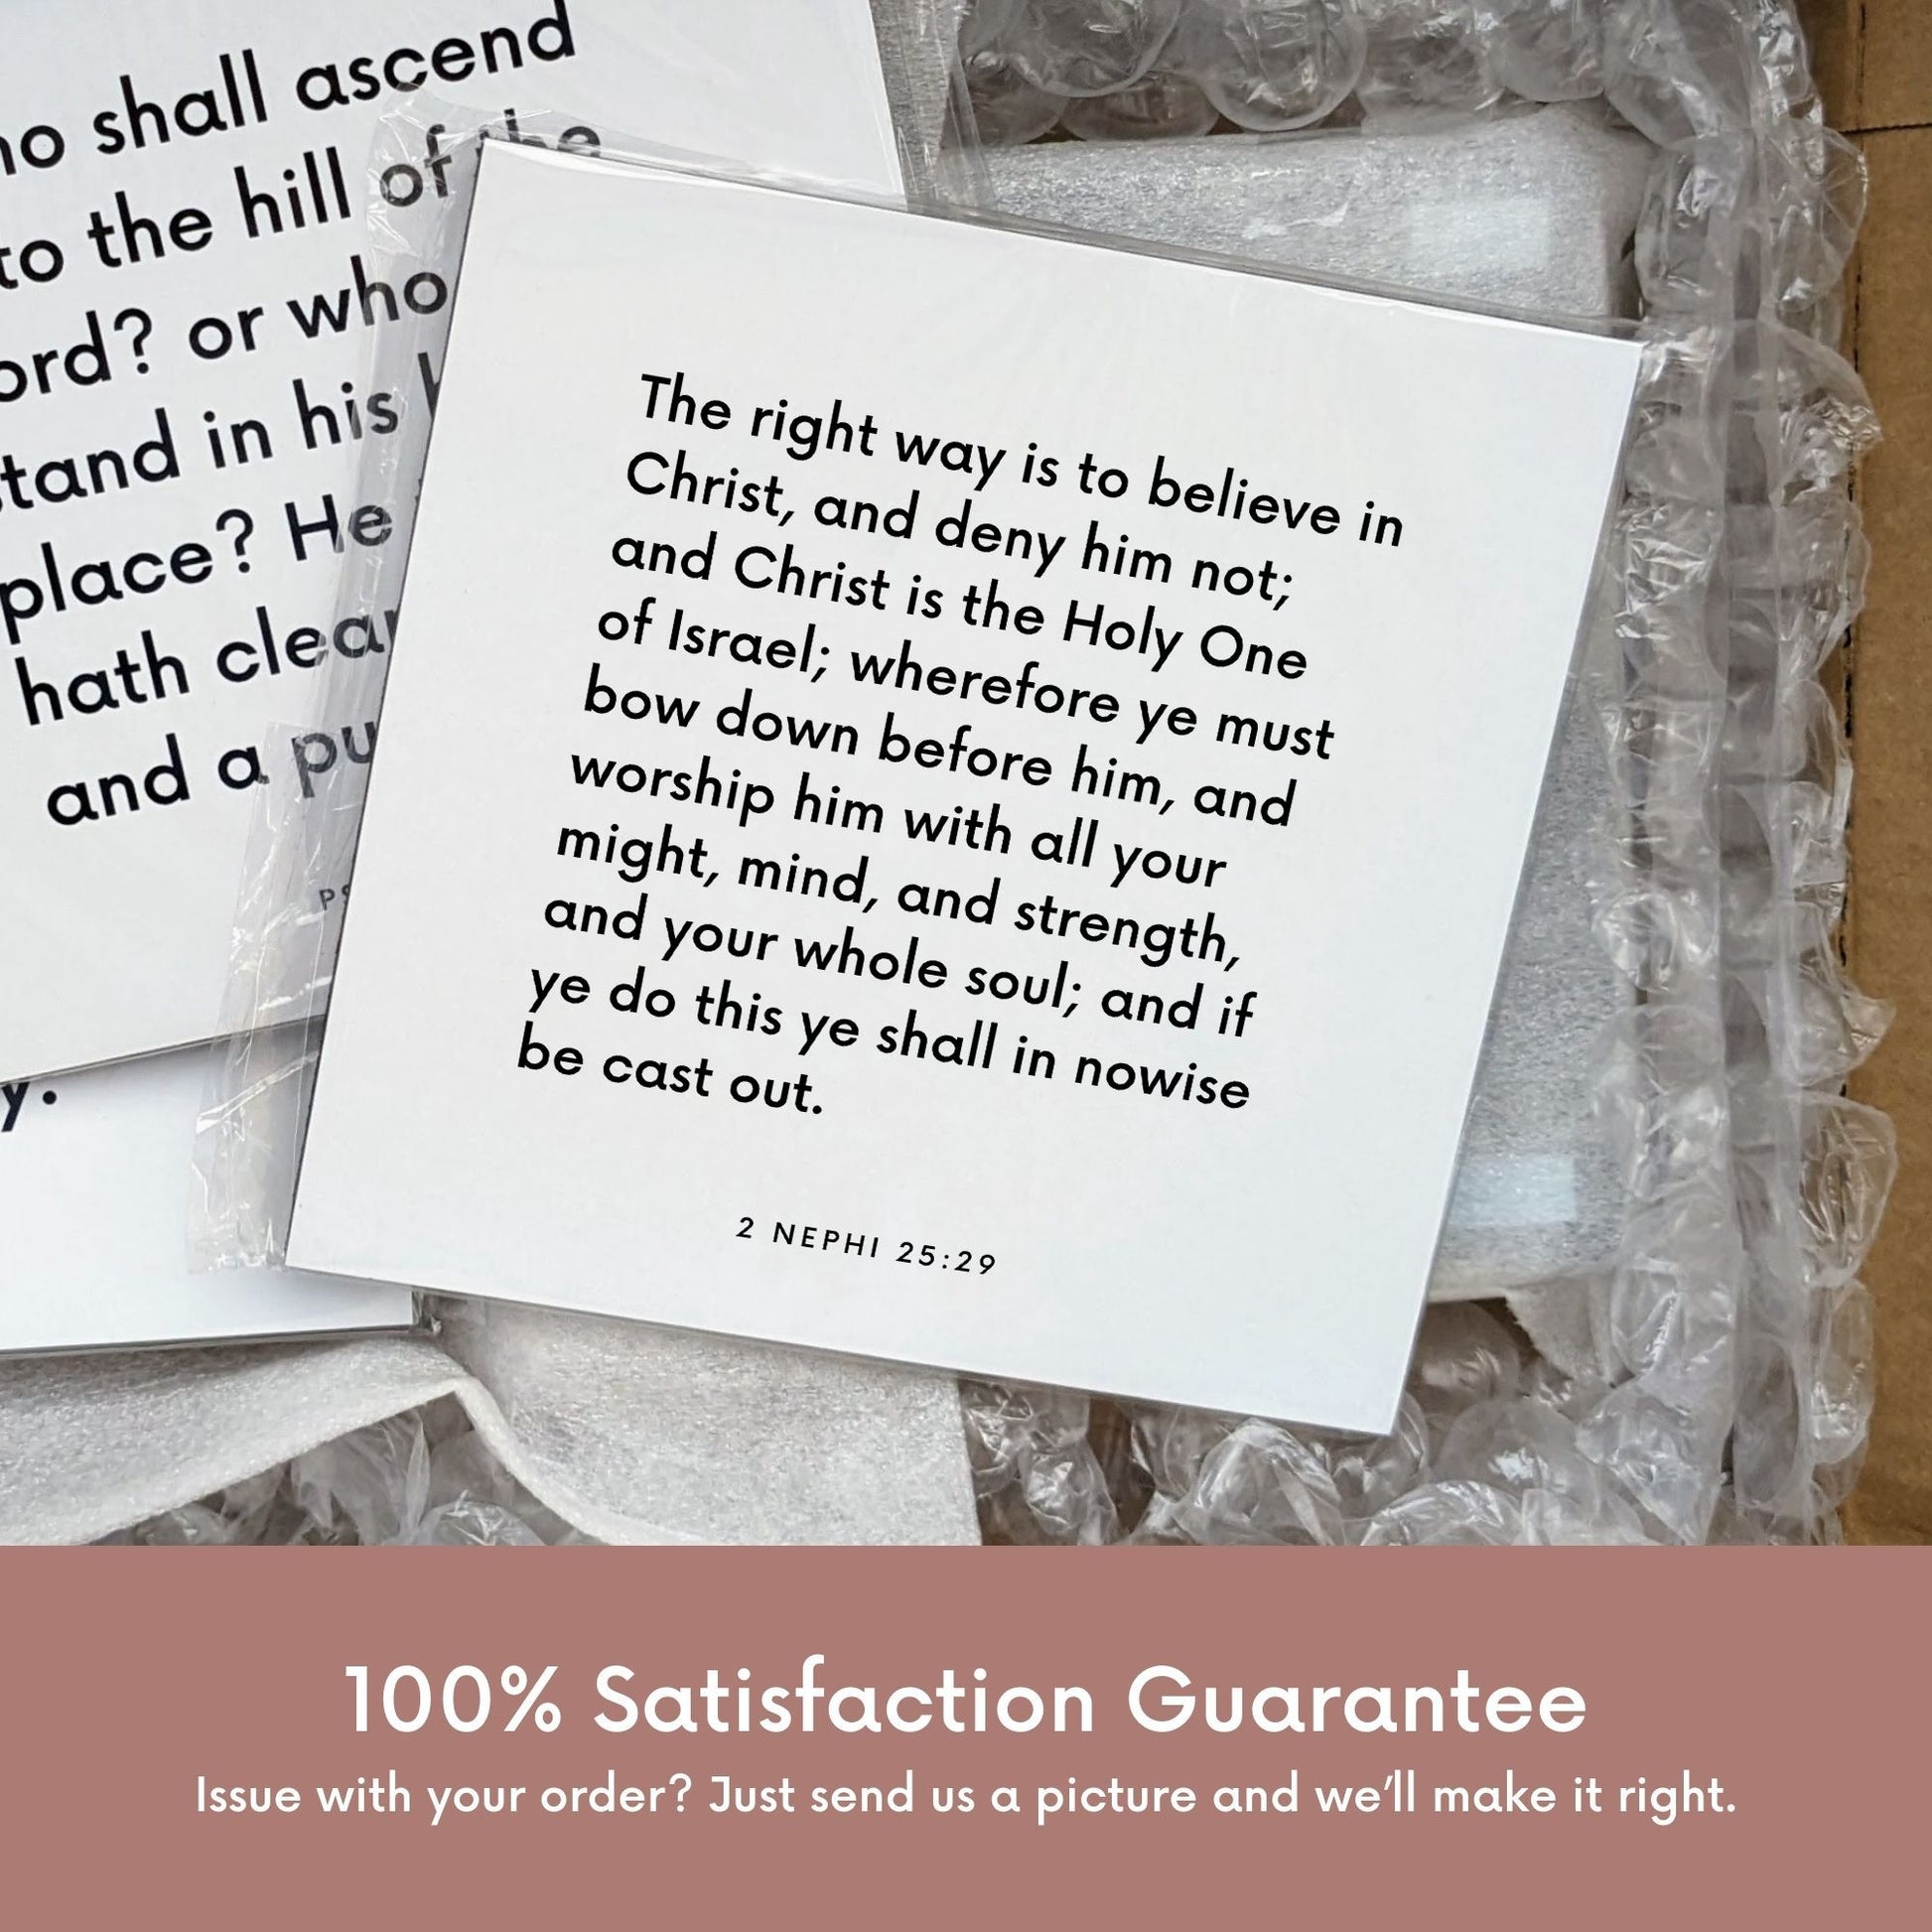 Shipping materials for scripture tile of 2 Nephi 25:29 - "The right way is to believe in Christ, and deny him not"